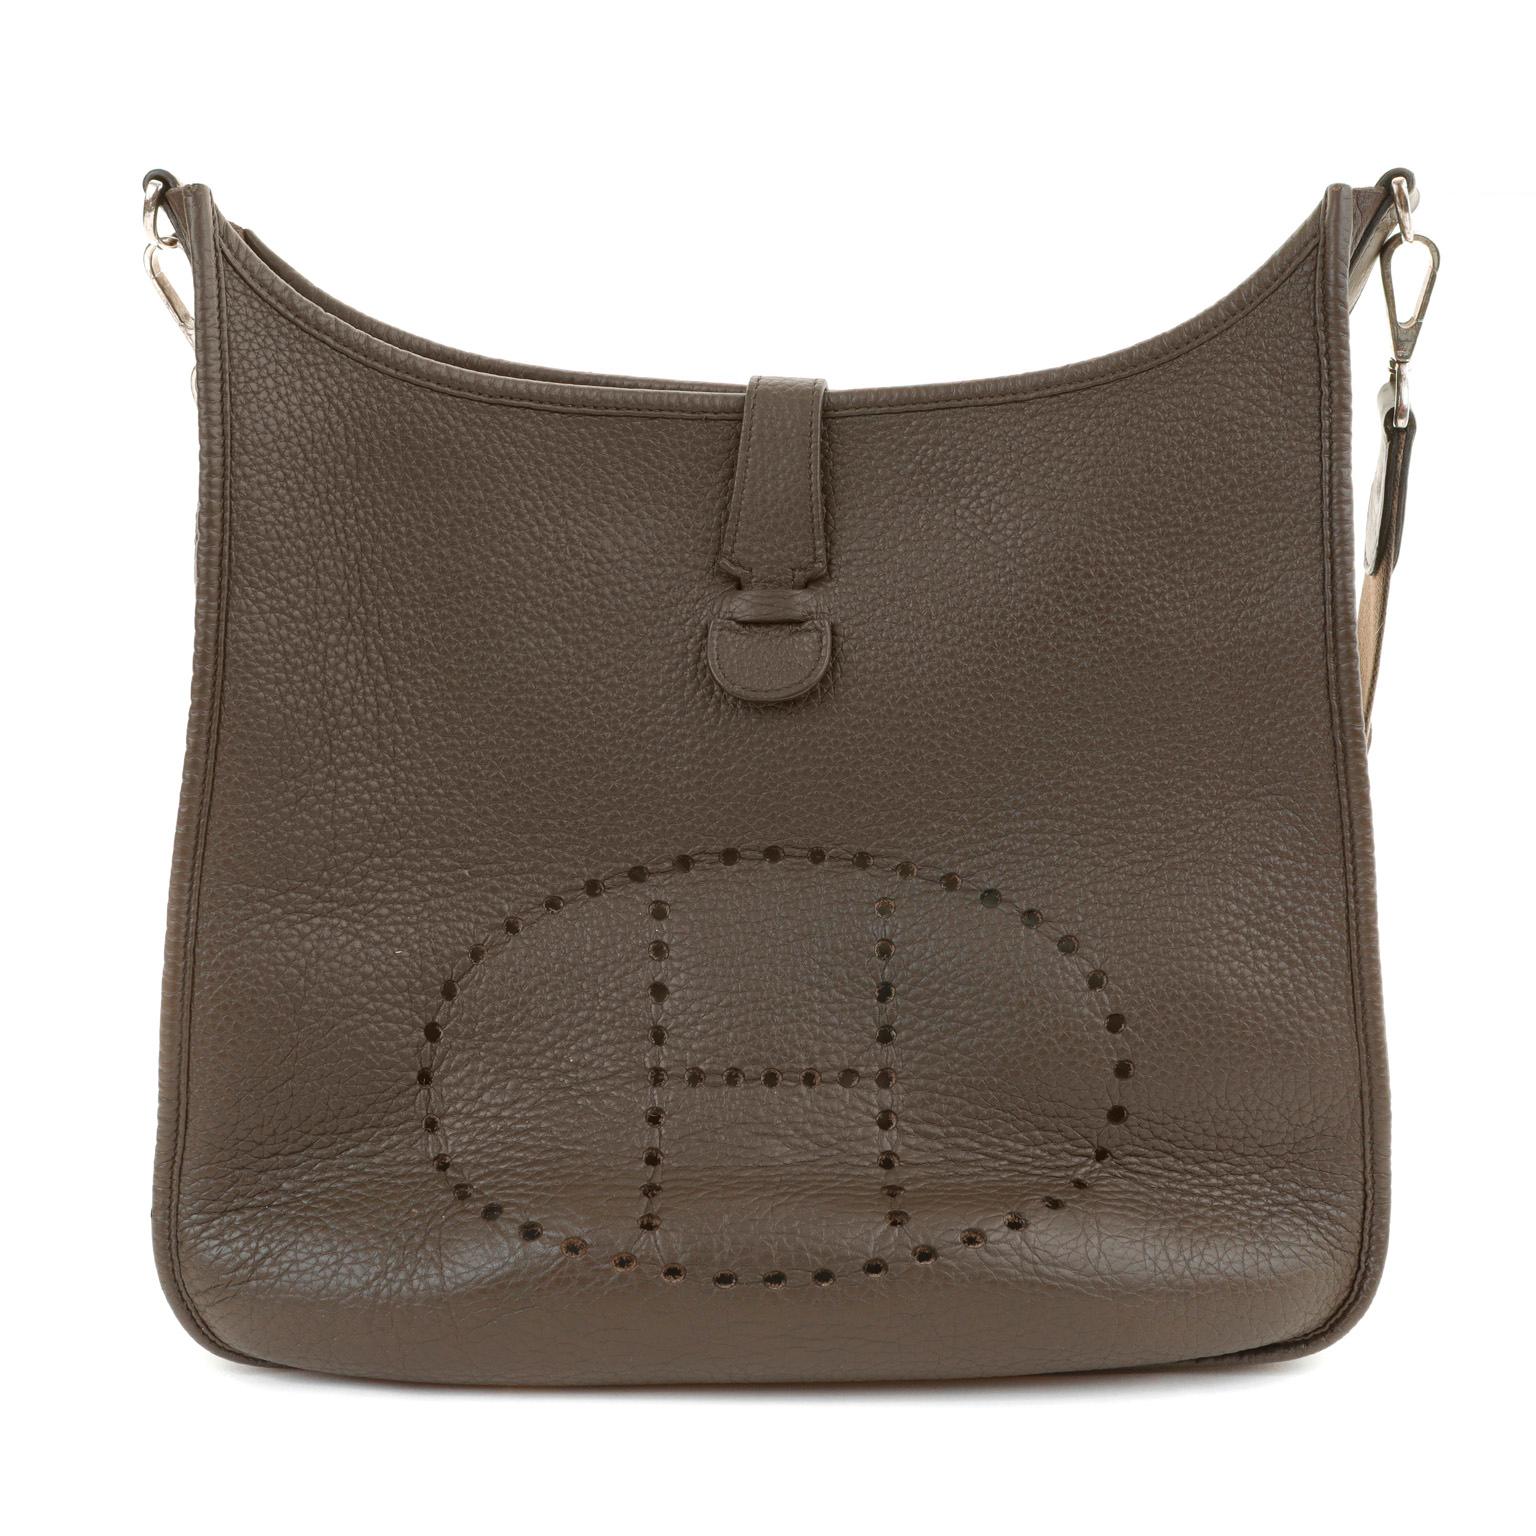 This authentic Hermès Chocolate Brown Evelyne TGM is in excellent condition. Extremely sought after, the Evelyne is an understated day bag that is stylish and practical. The TGM is the largest size produced; suitable for both men and women.

The